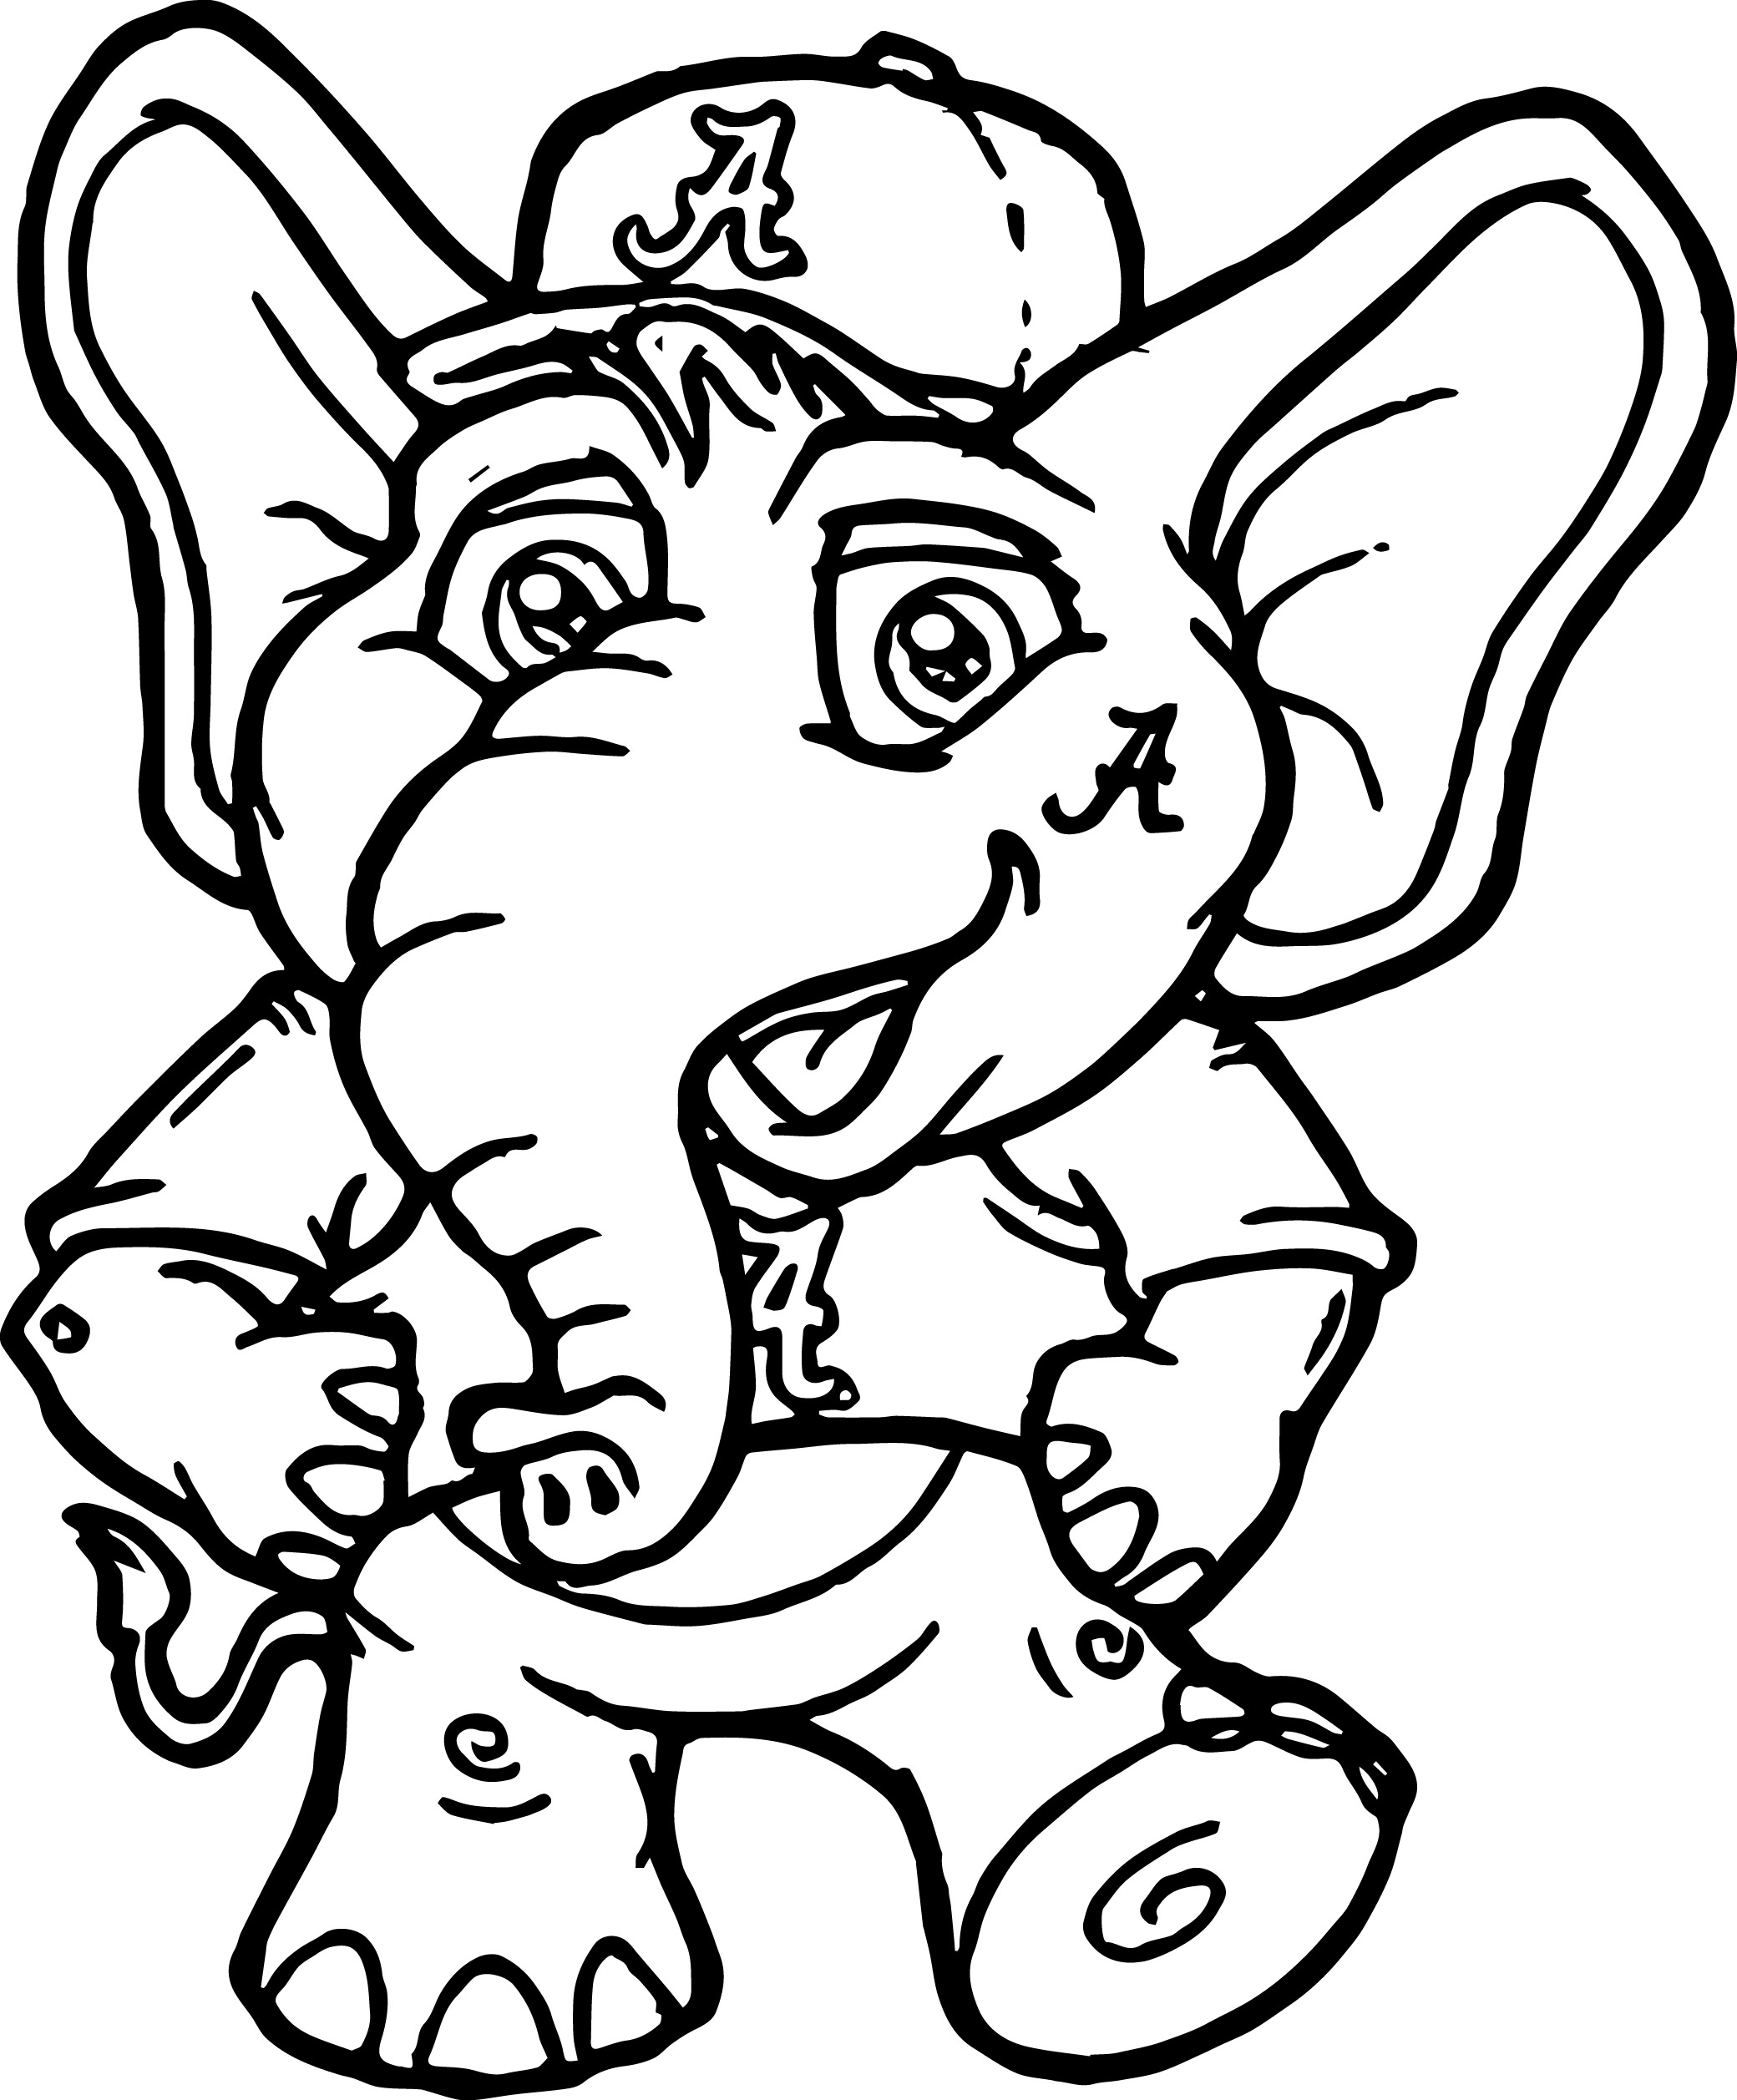 Alabama Football Coloring Pages | Wecoloringpage